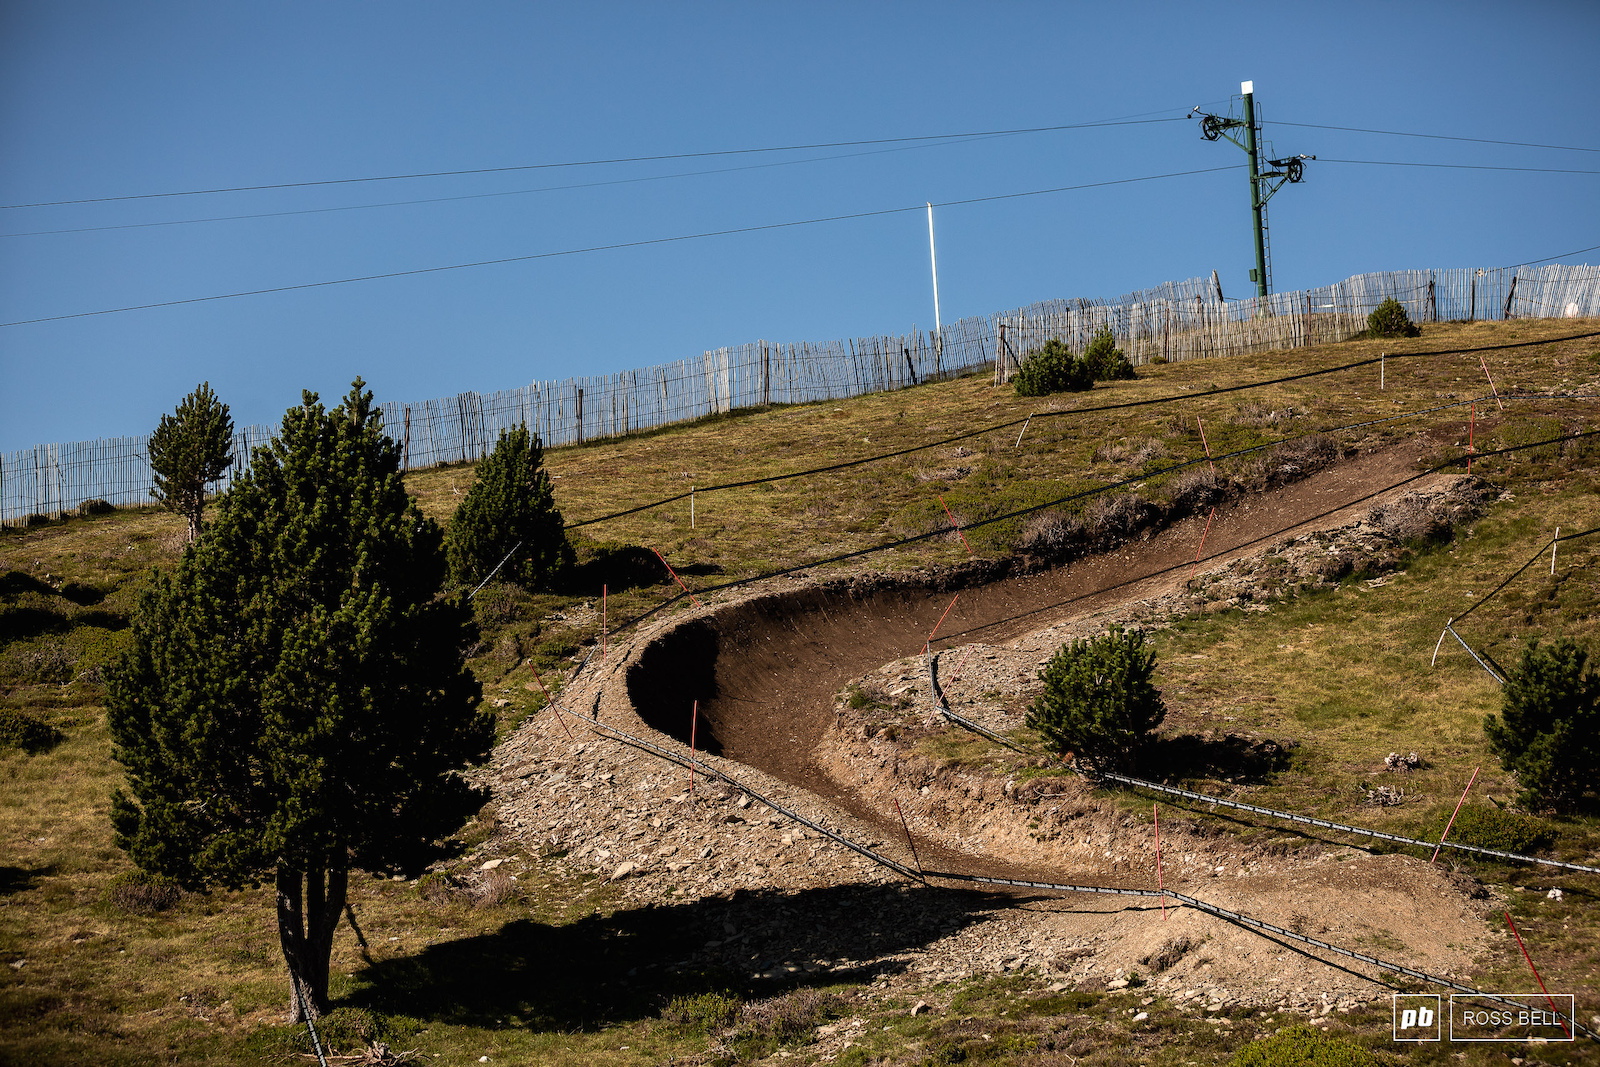 The top section of the course is all about big berms.